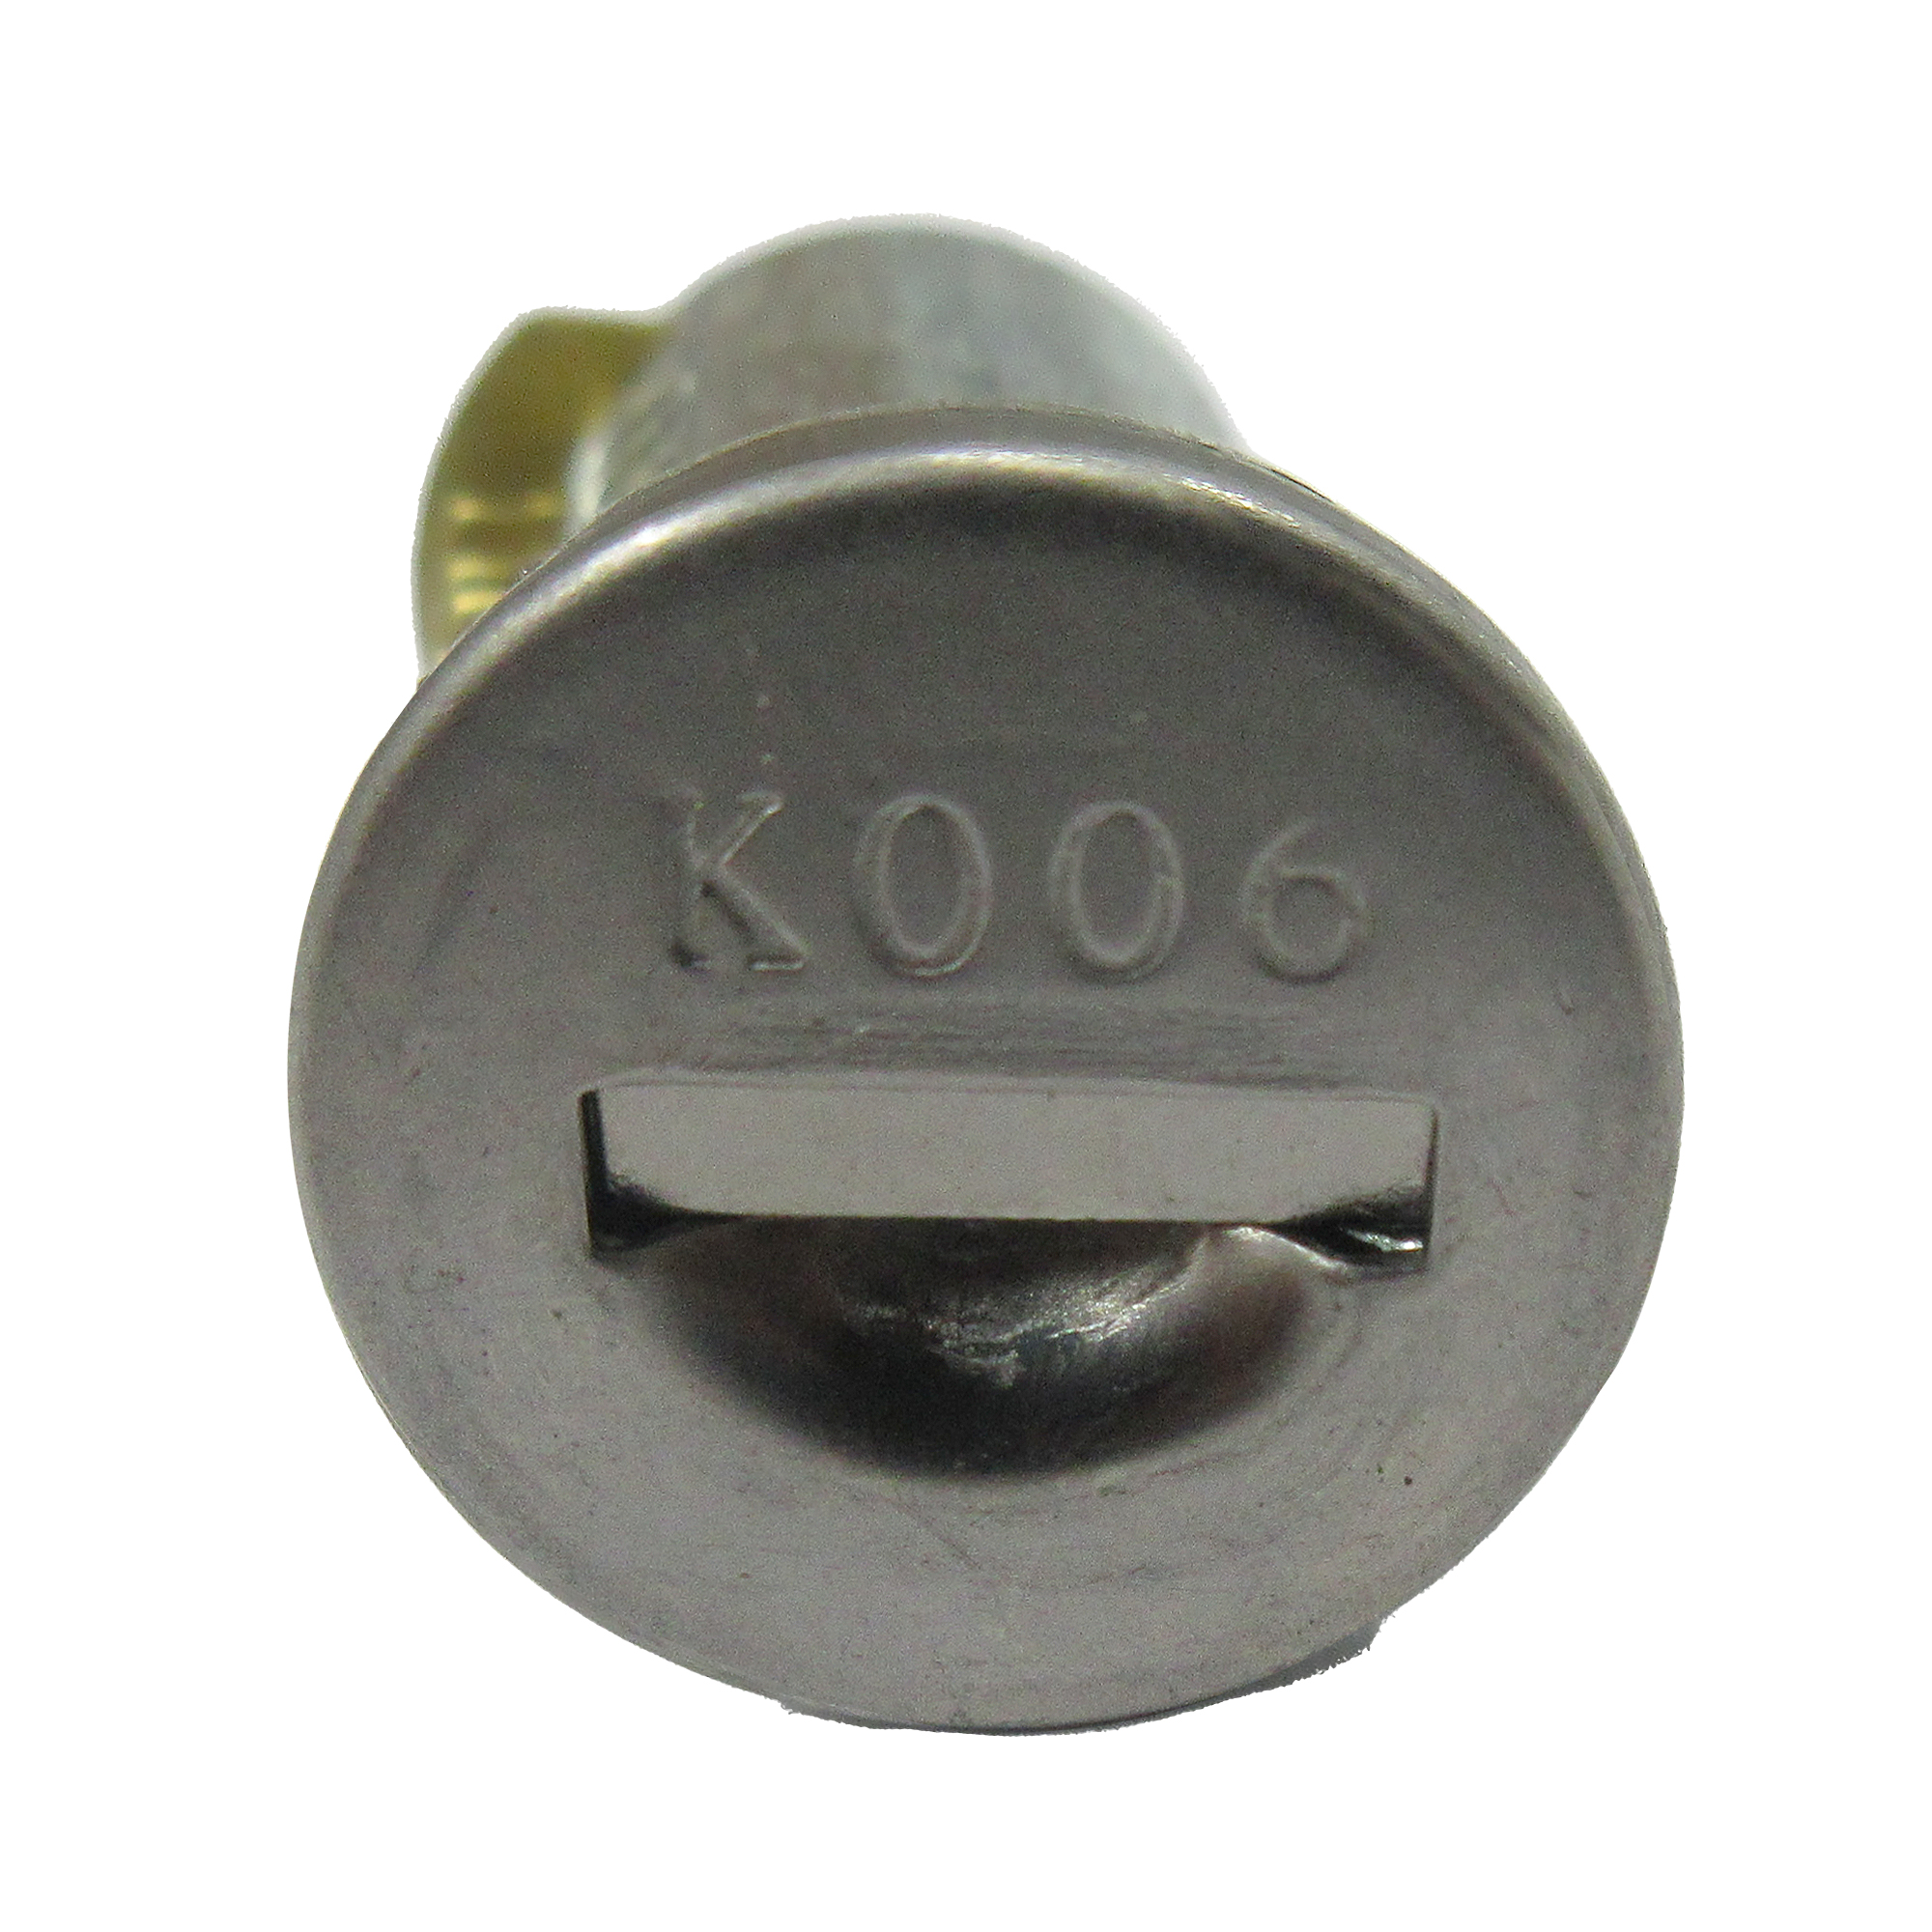 For Hitch Mounted Ski Rack - Key Core Replacement | Variant K006 | SP-RK1B70725